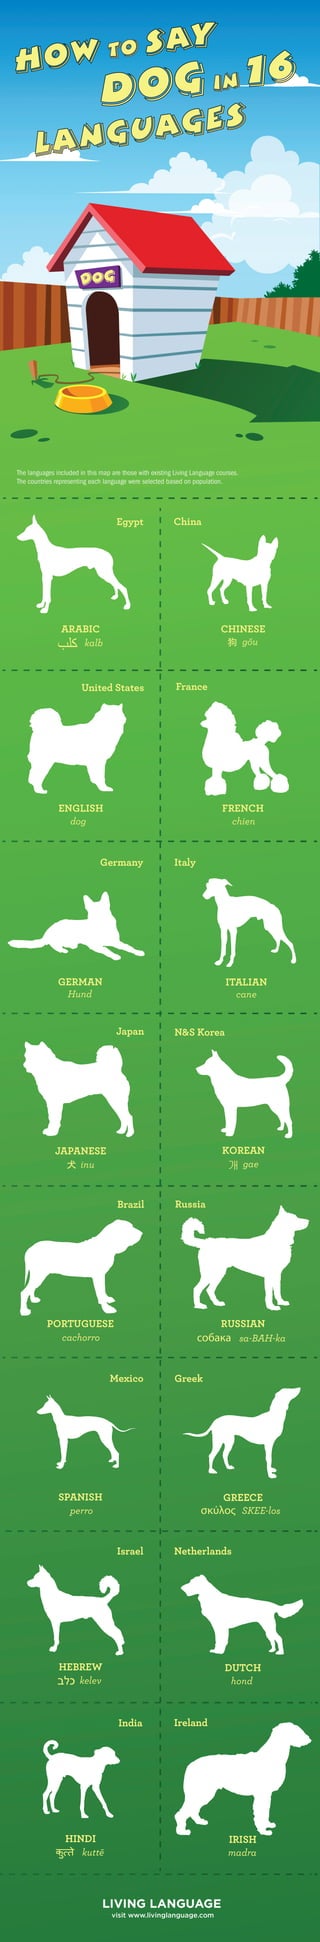 How to Say Dog in Multiple Languages